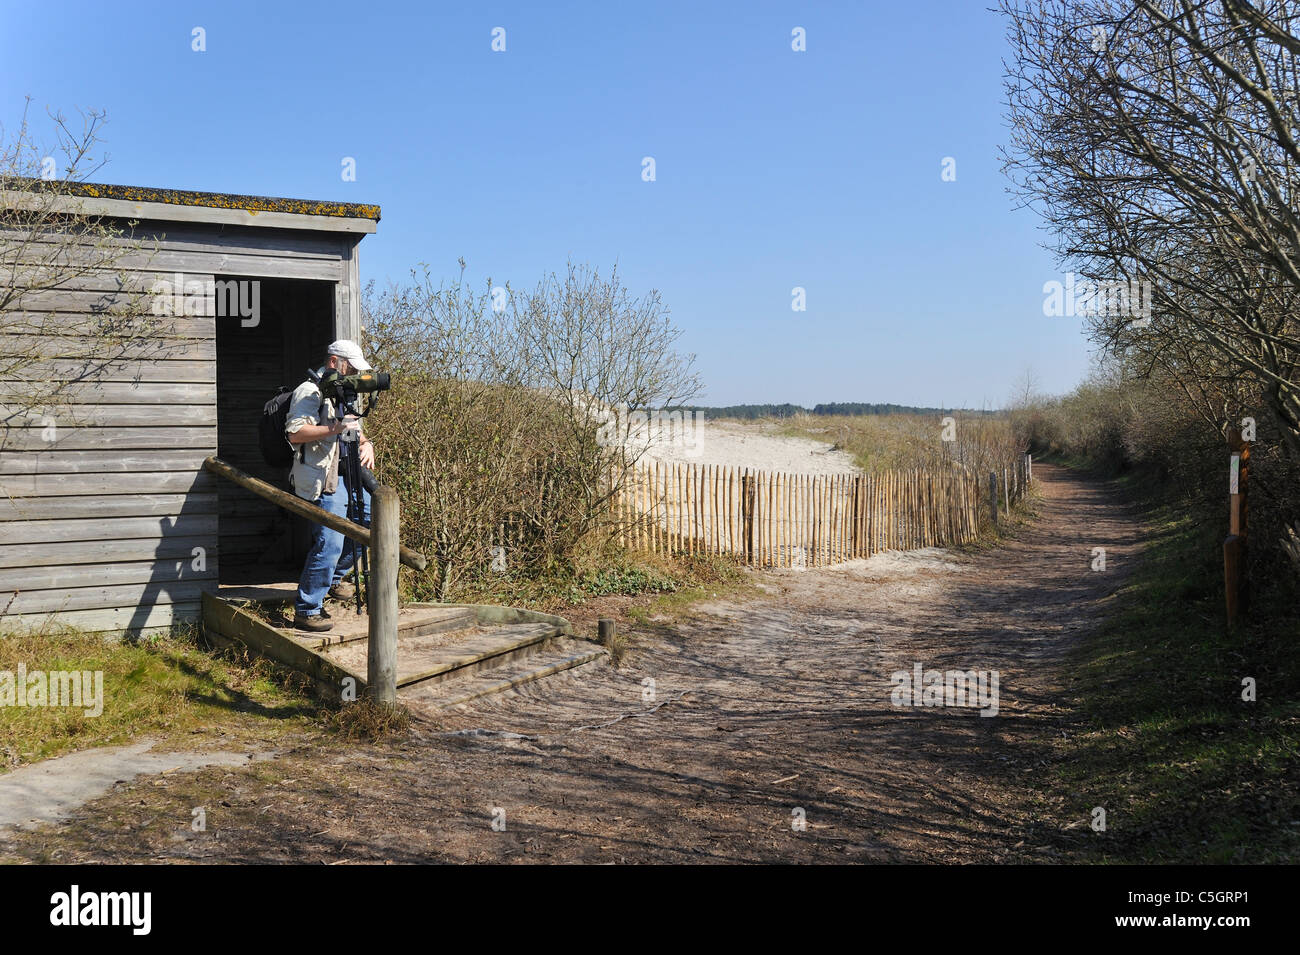 Birdwatcher with telescope leaving bird hide in the nature reserve Parc du Marquenterre at the Bay of the Somme, Picardy, France Stock Photo